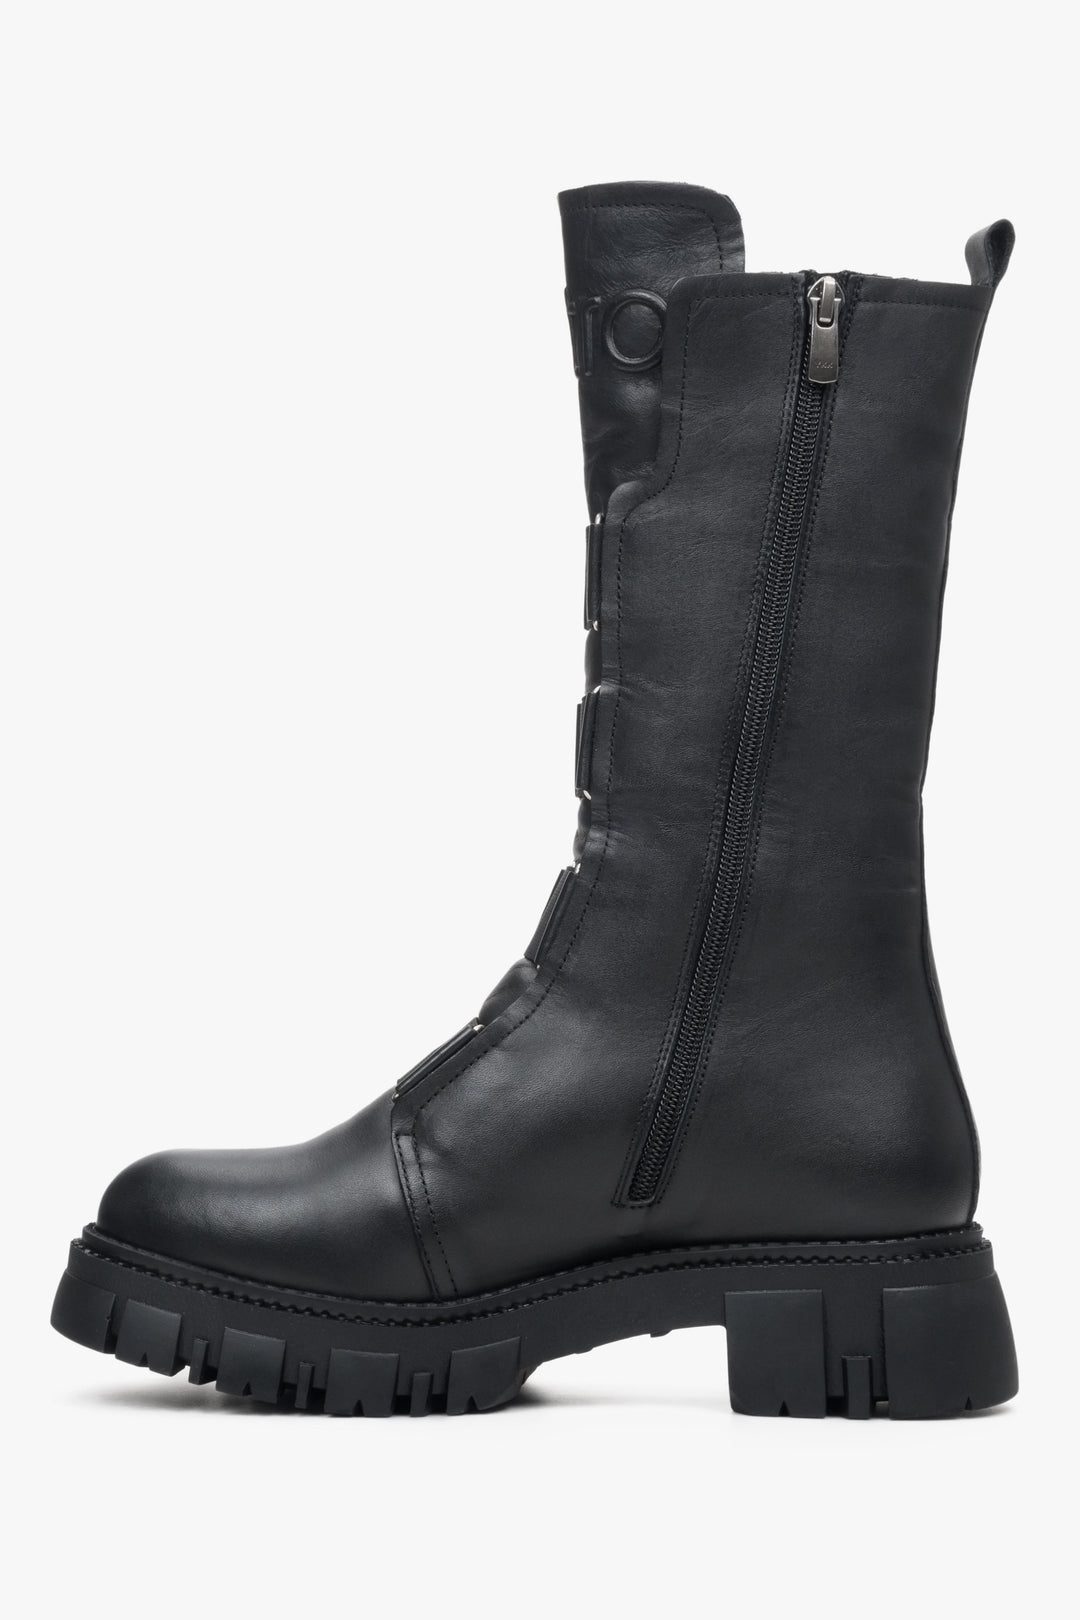 High black leather women's boots by Estro with an elastic insert - shoe profile.